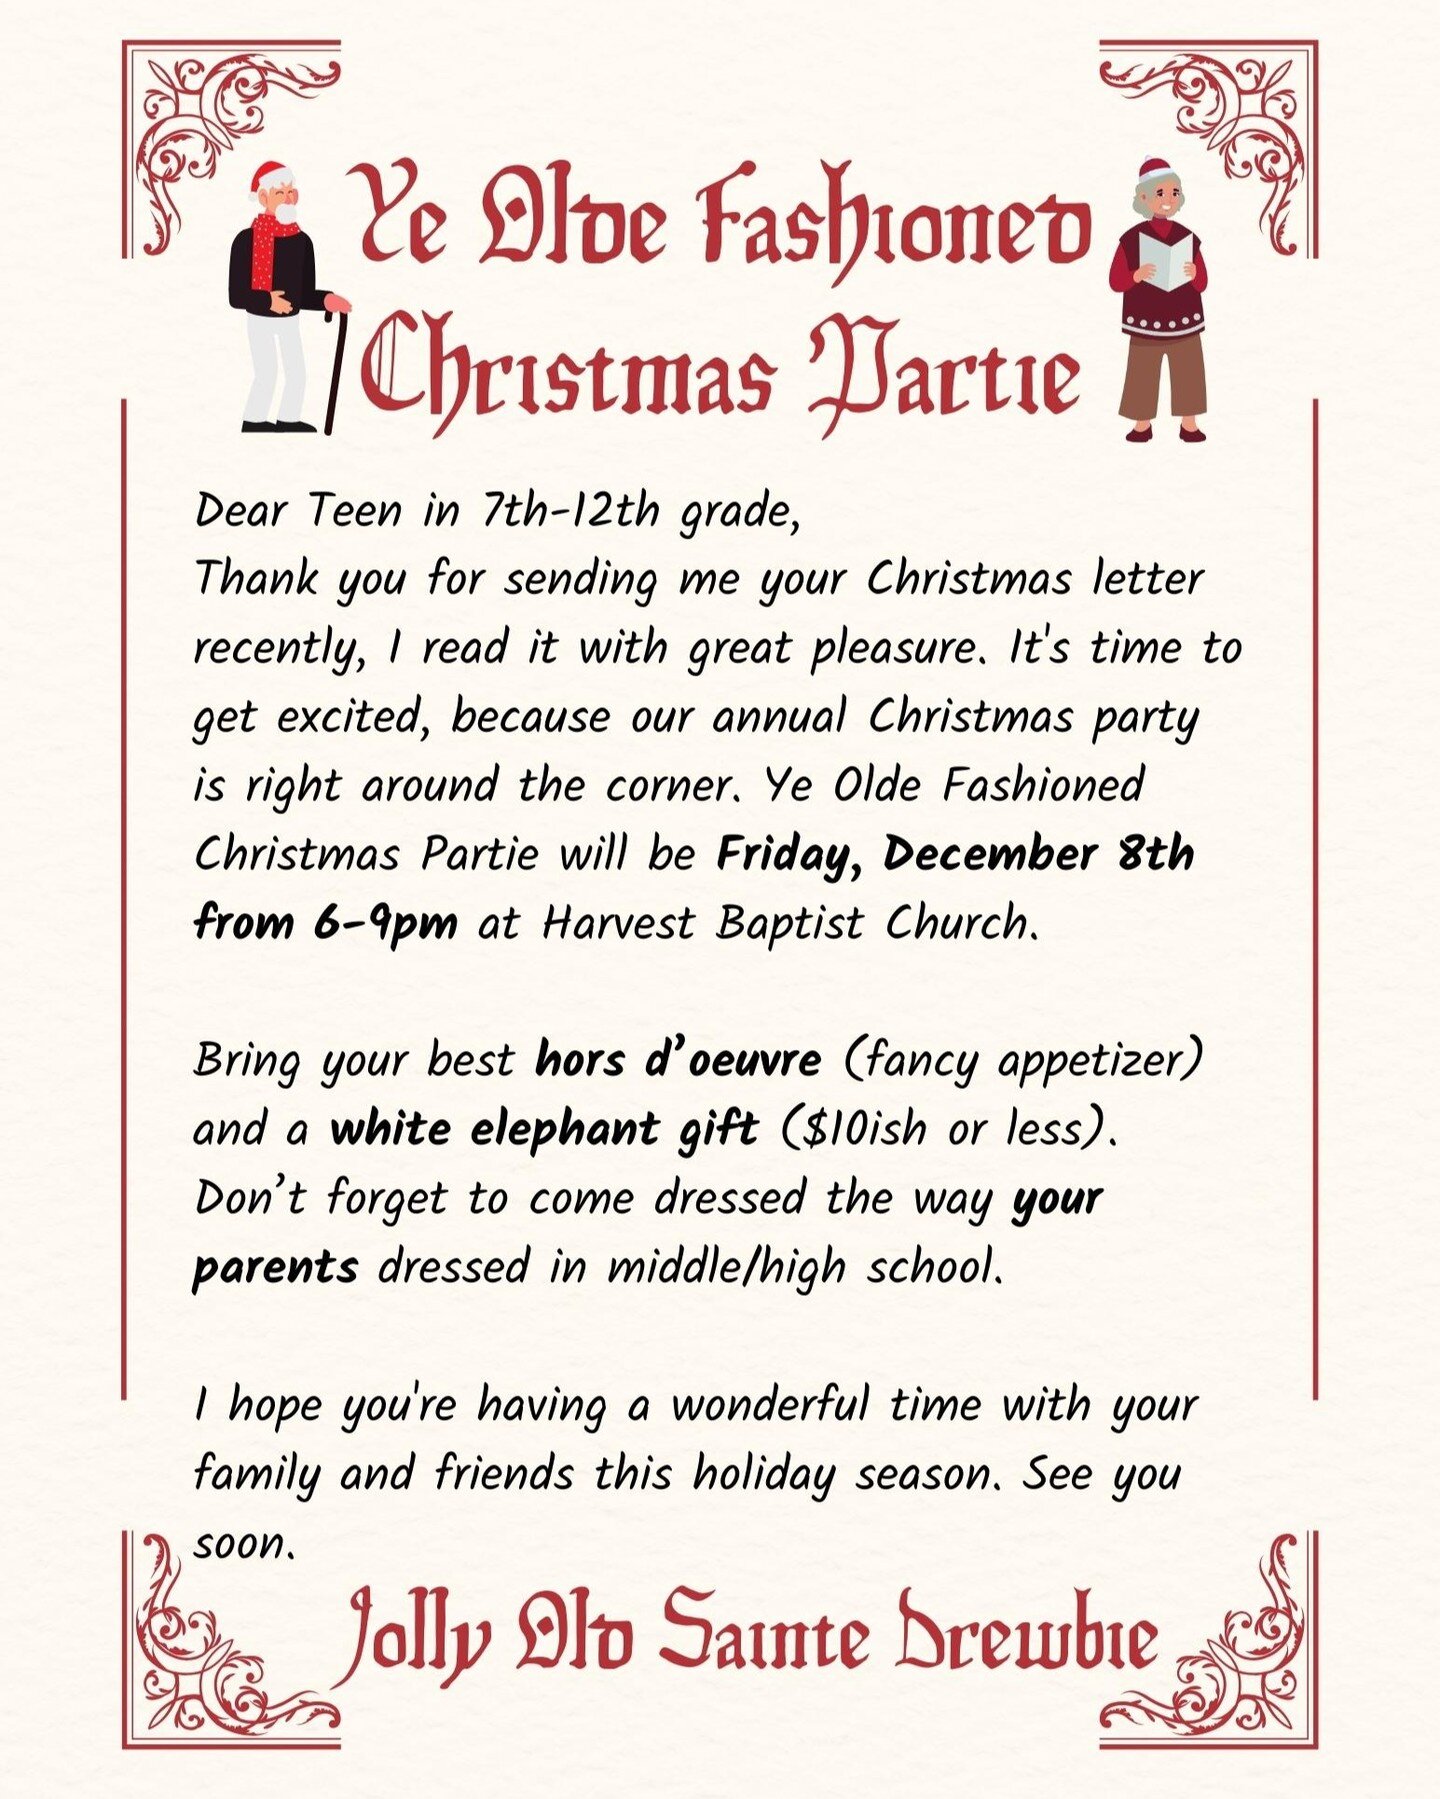 Christmas Party is December 8!